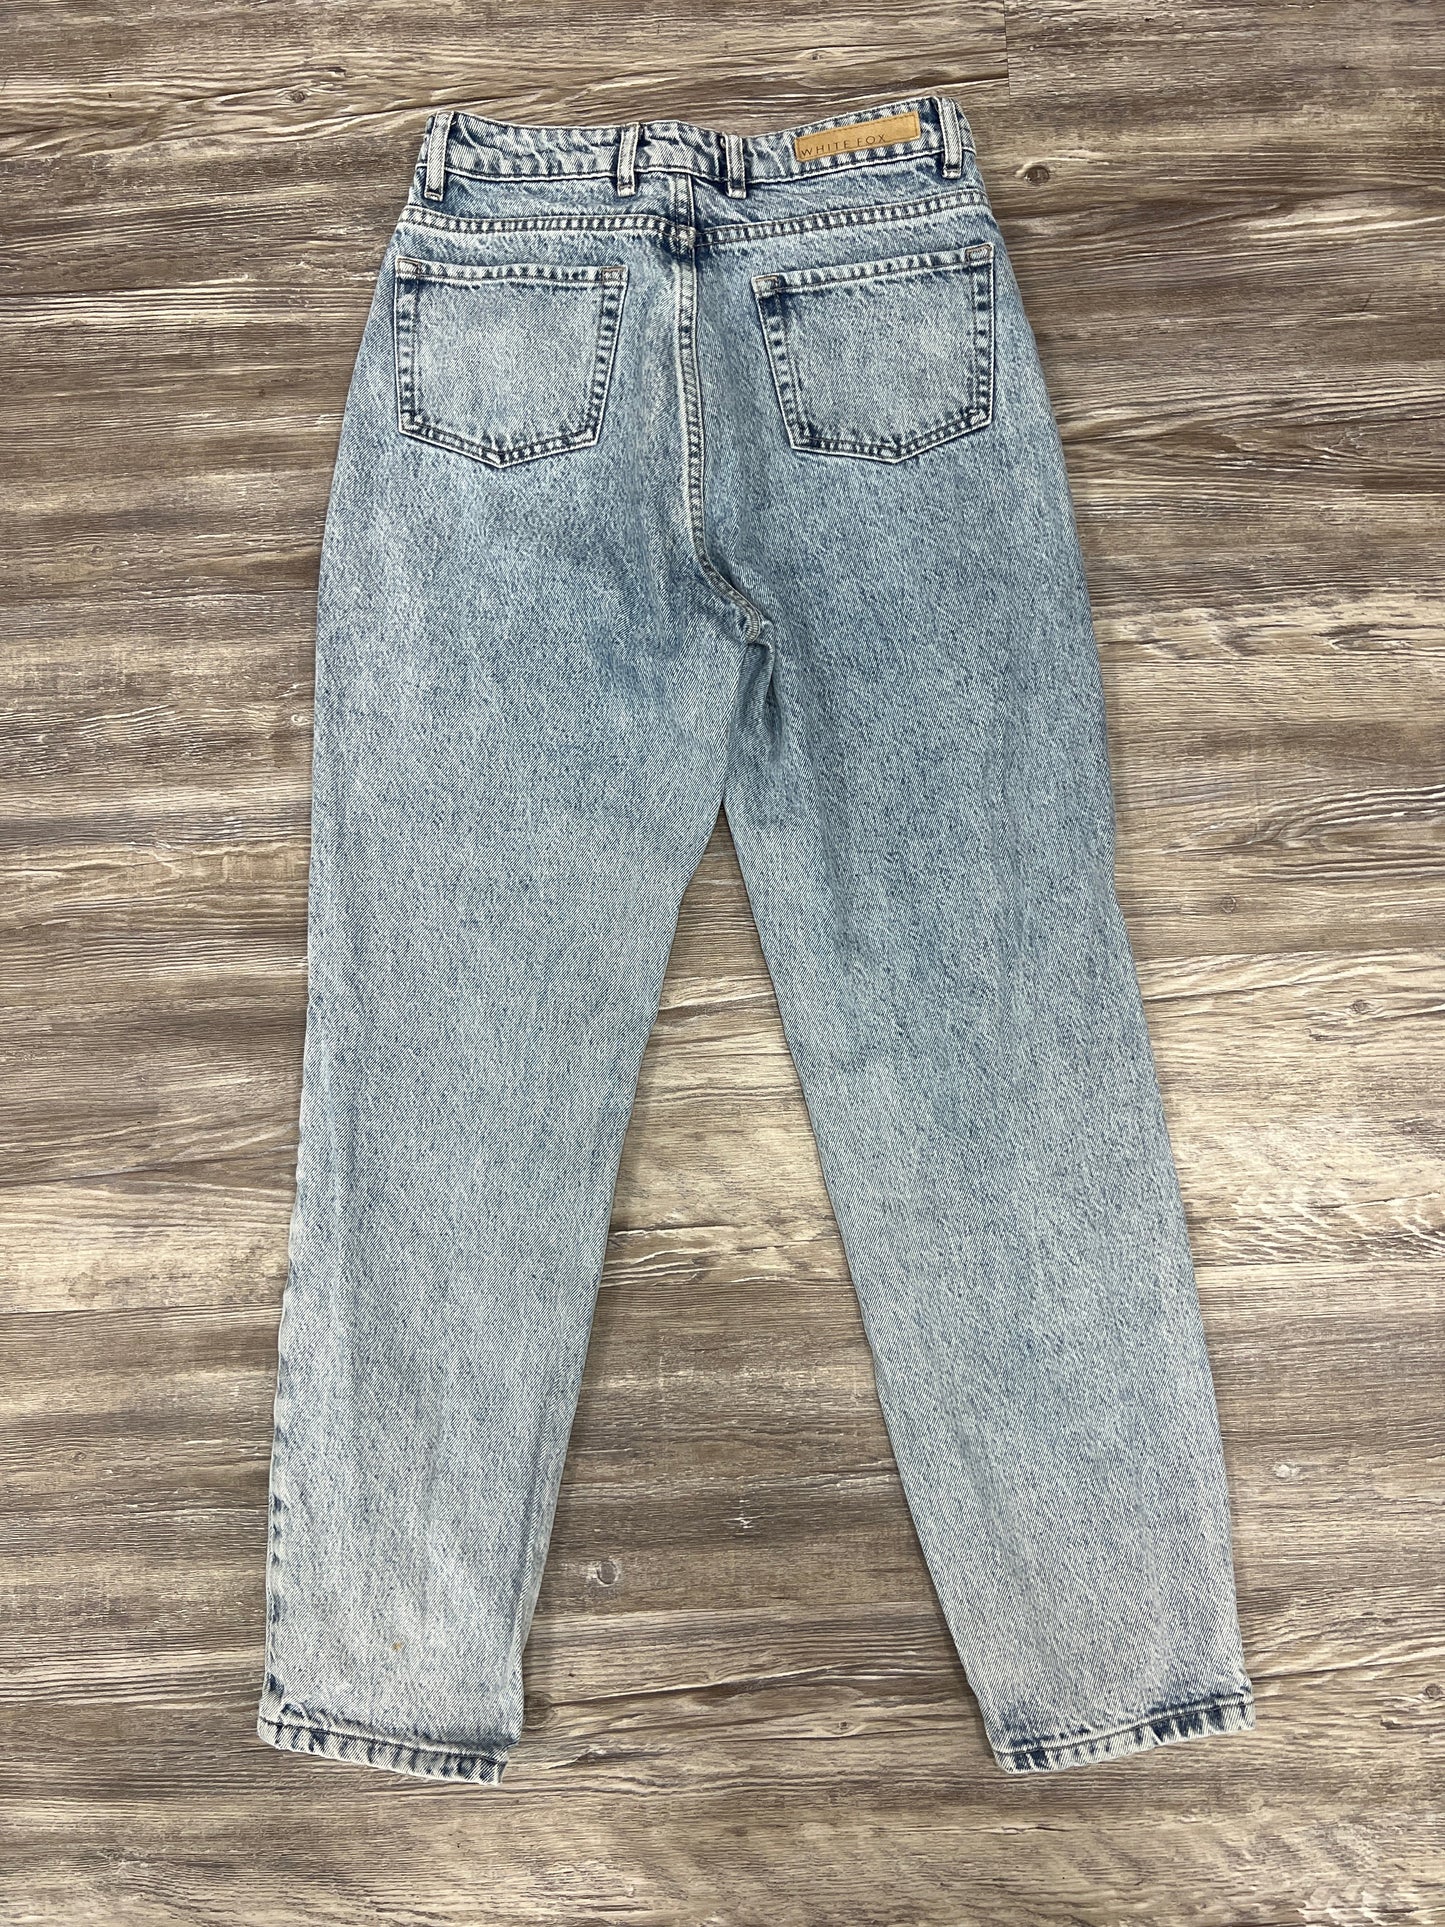 Jeans Relaxed By White Fox Size: S